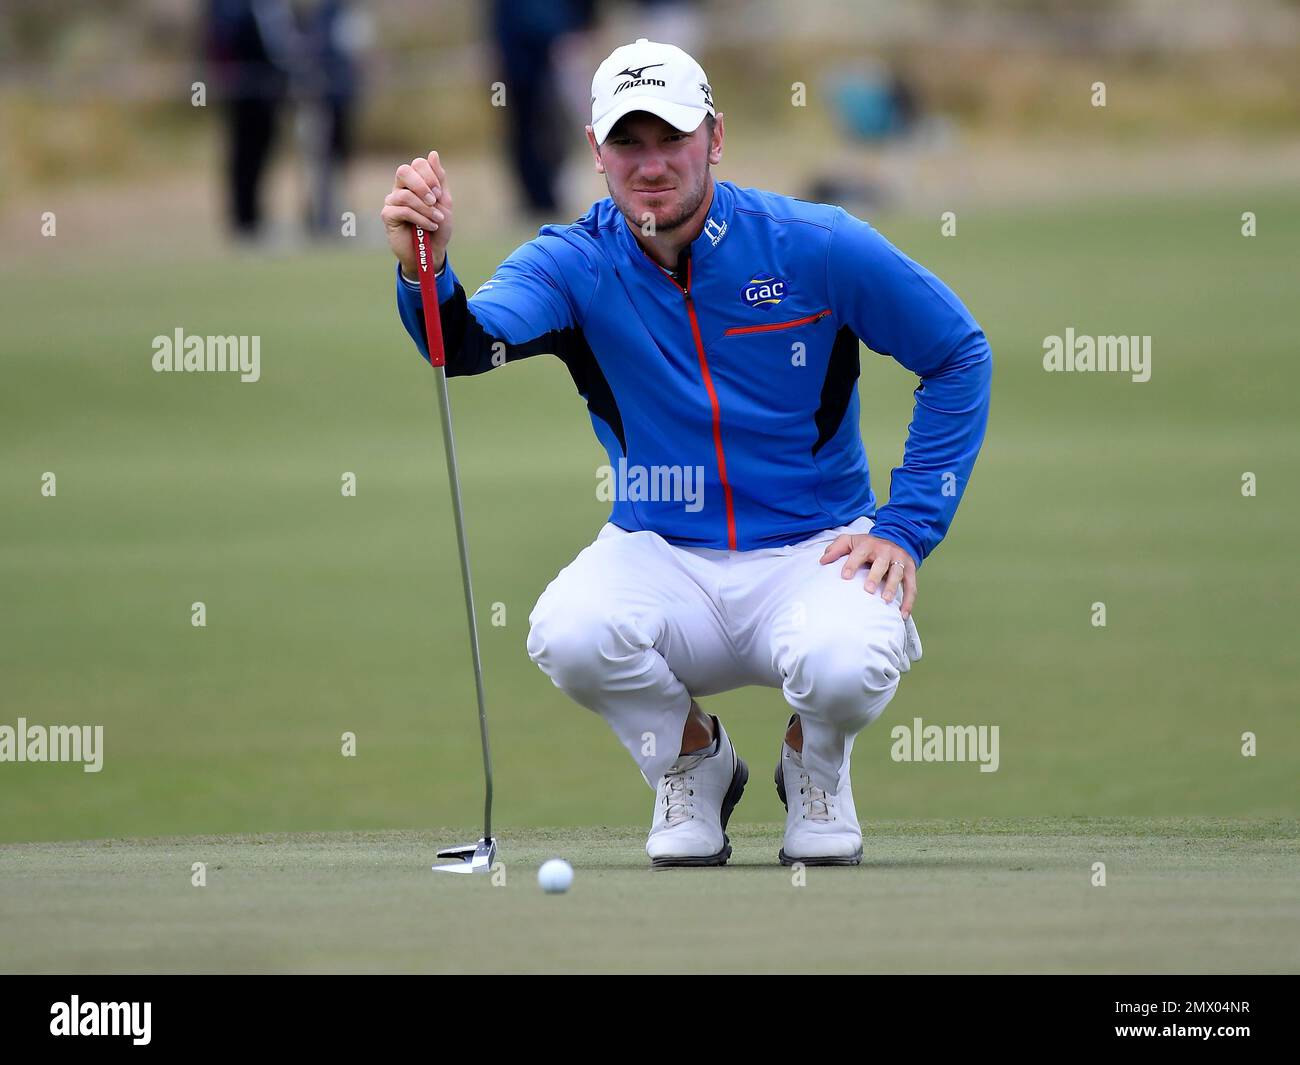 England's Chris Wood lines up his putt on the 18th green during his match  at the World Cup of Golf at Kingston Heath in Melbourne, Australia, Friday,  Nov. 25, 2016. (AP Photo/Andrew